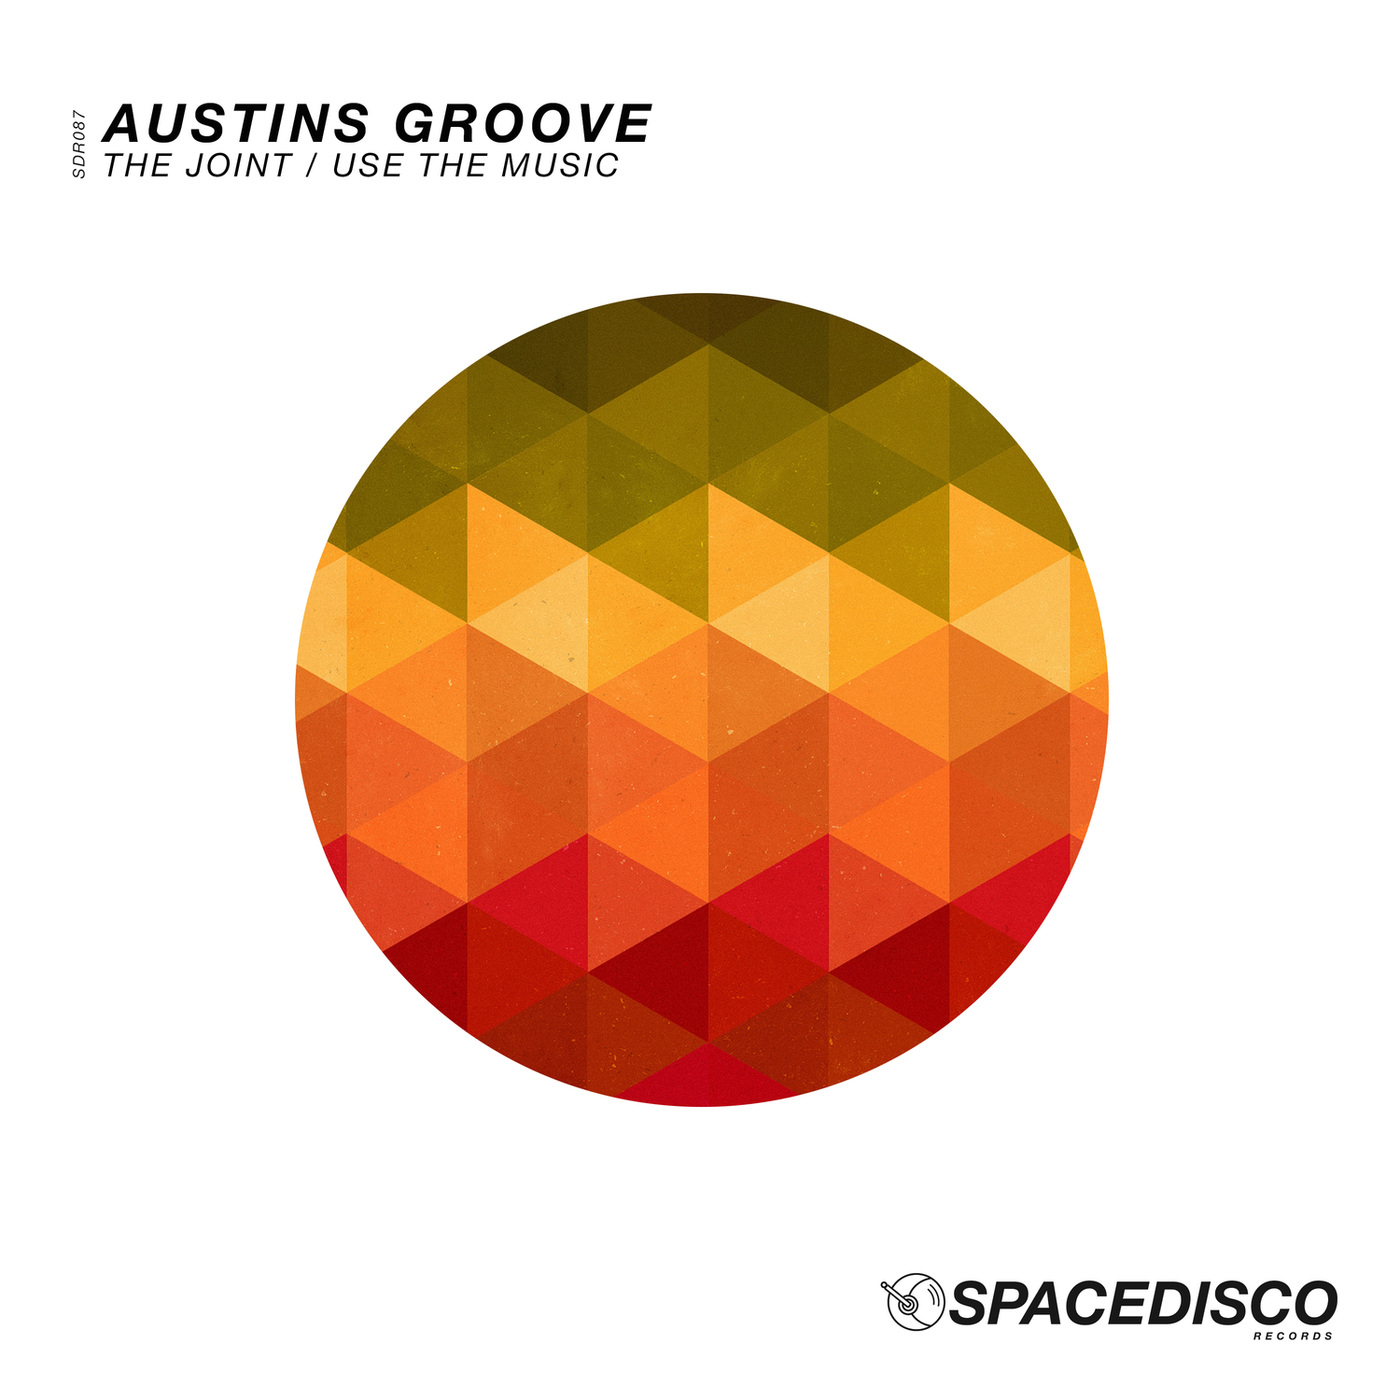 Austins Groove - The Joint / Use the Music / Spacedisco Records